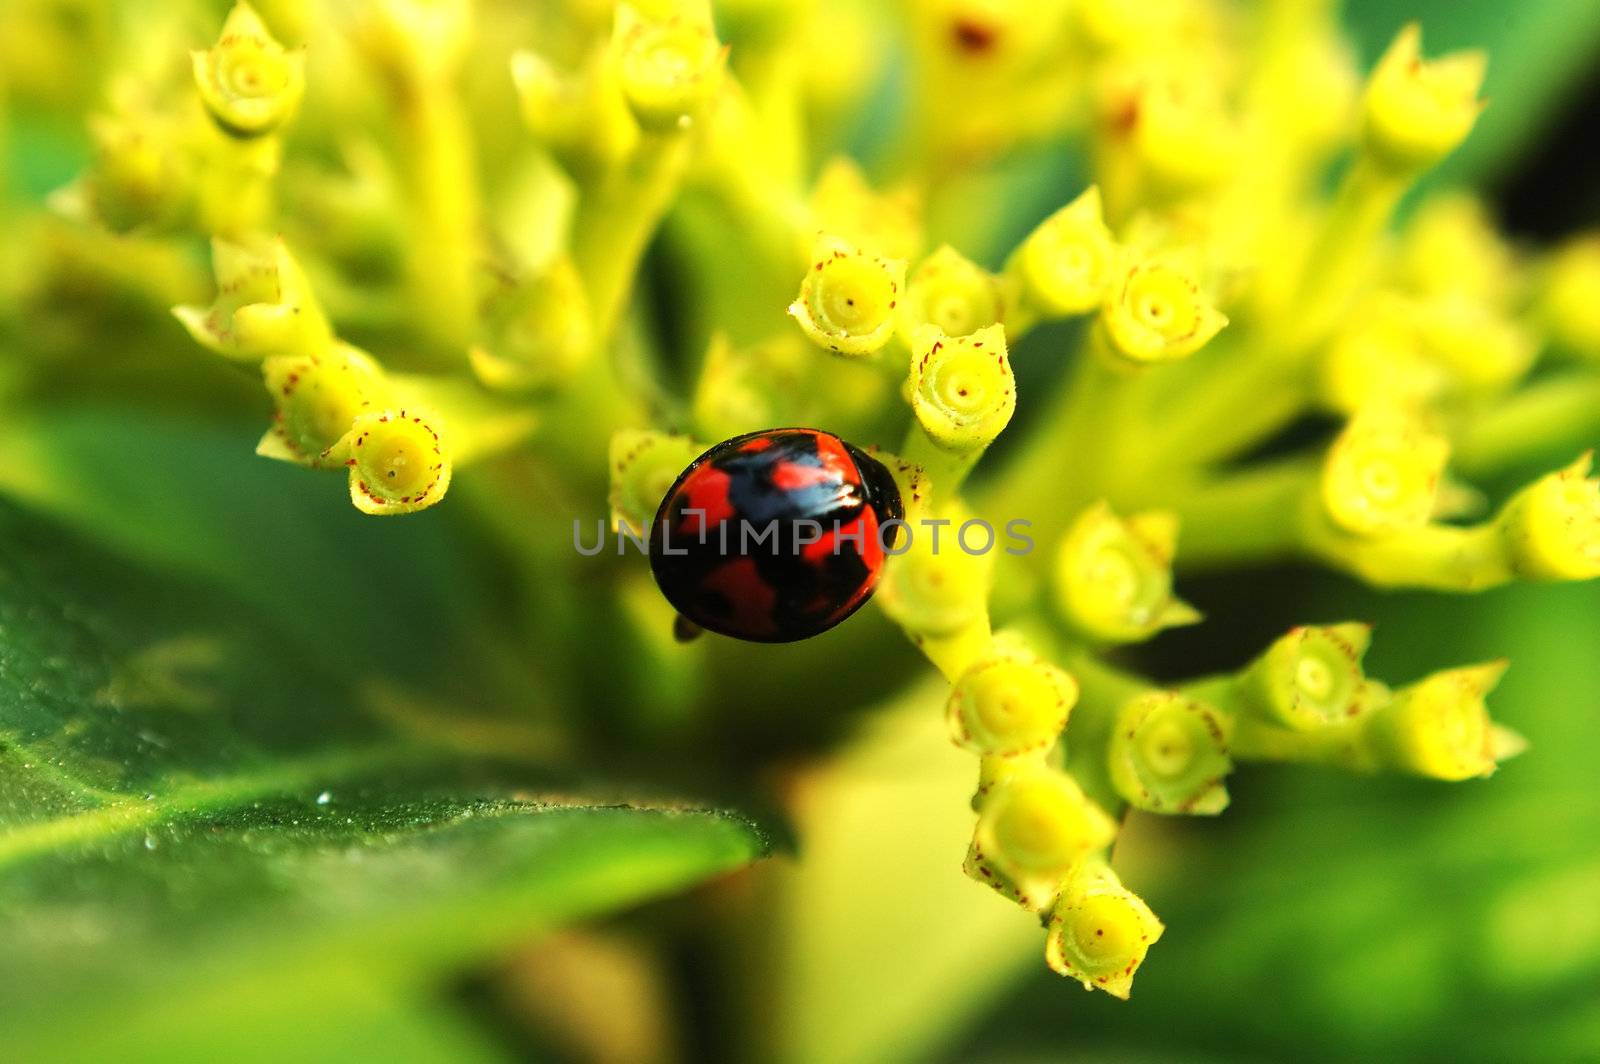 A ladybird standing on yellow flowers